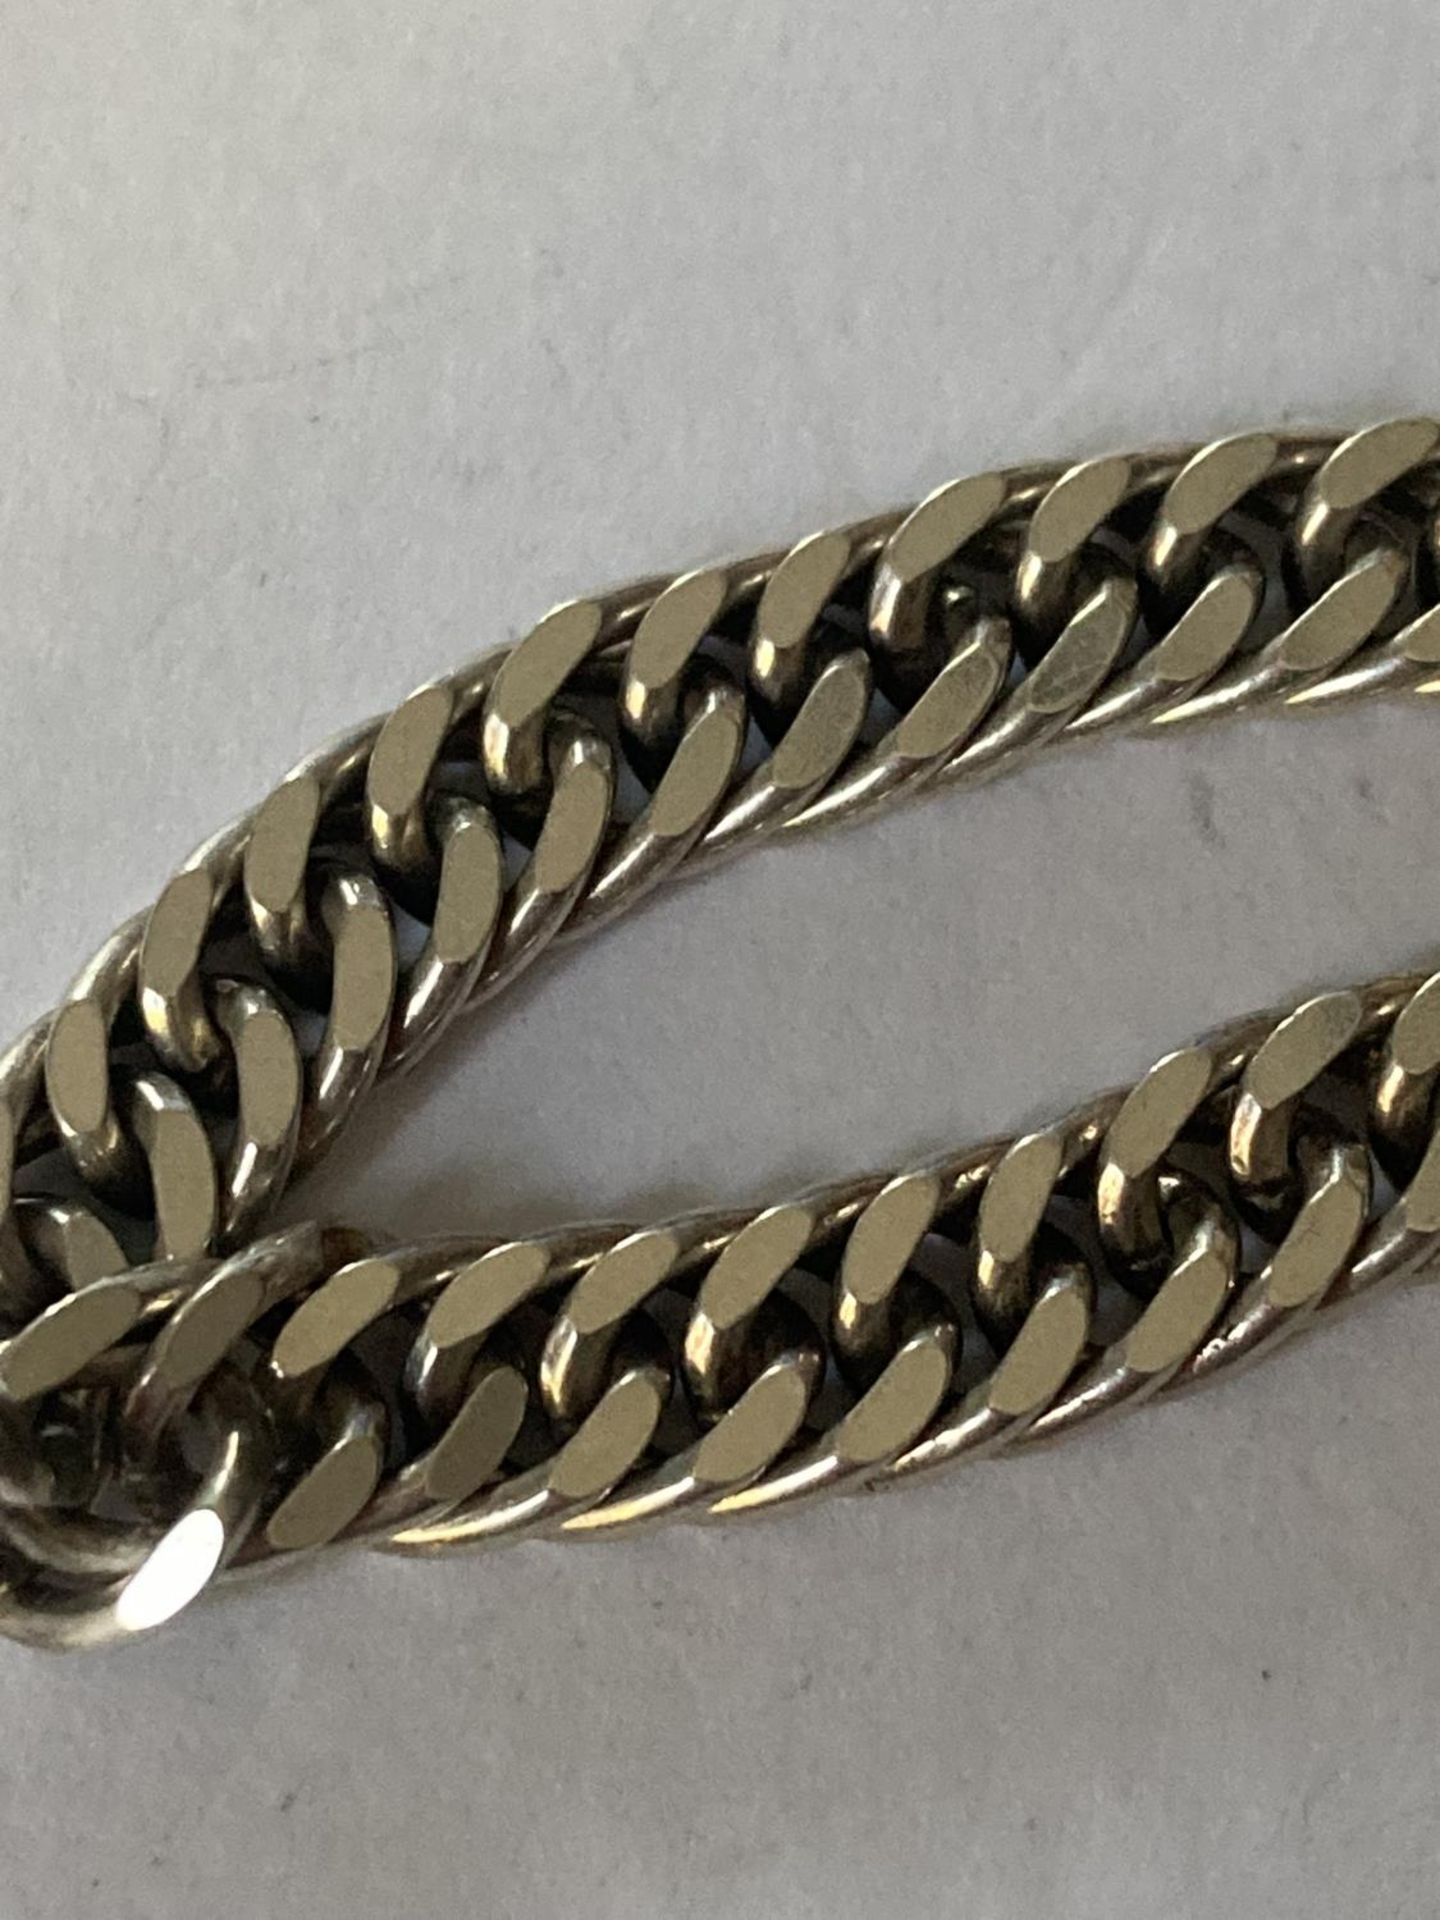 A SILVER WRIST CHAIN - Image 3 of 3